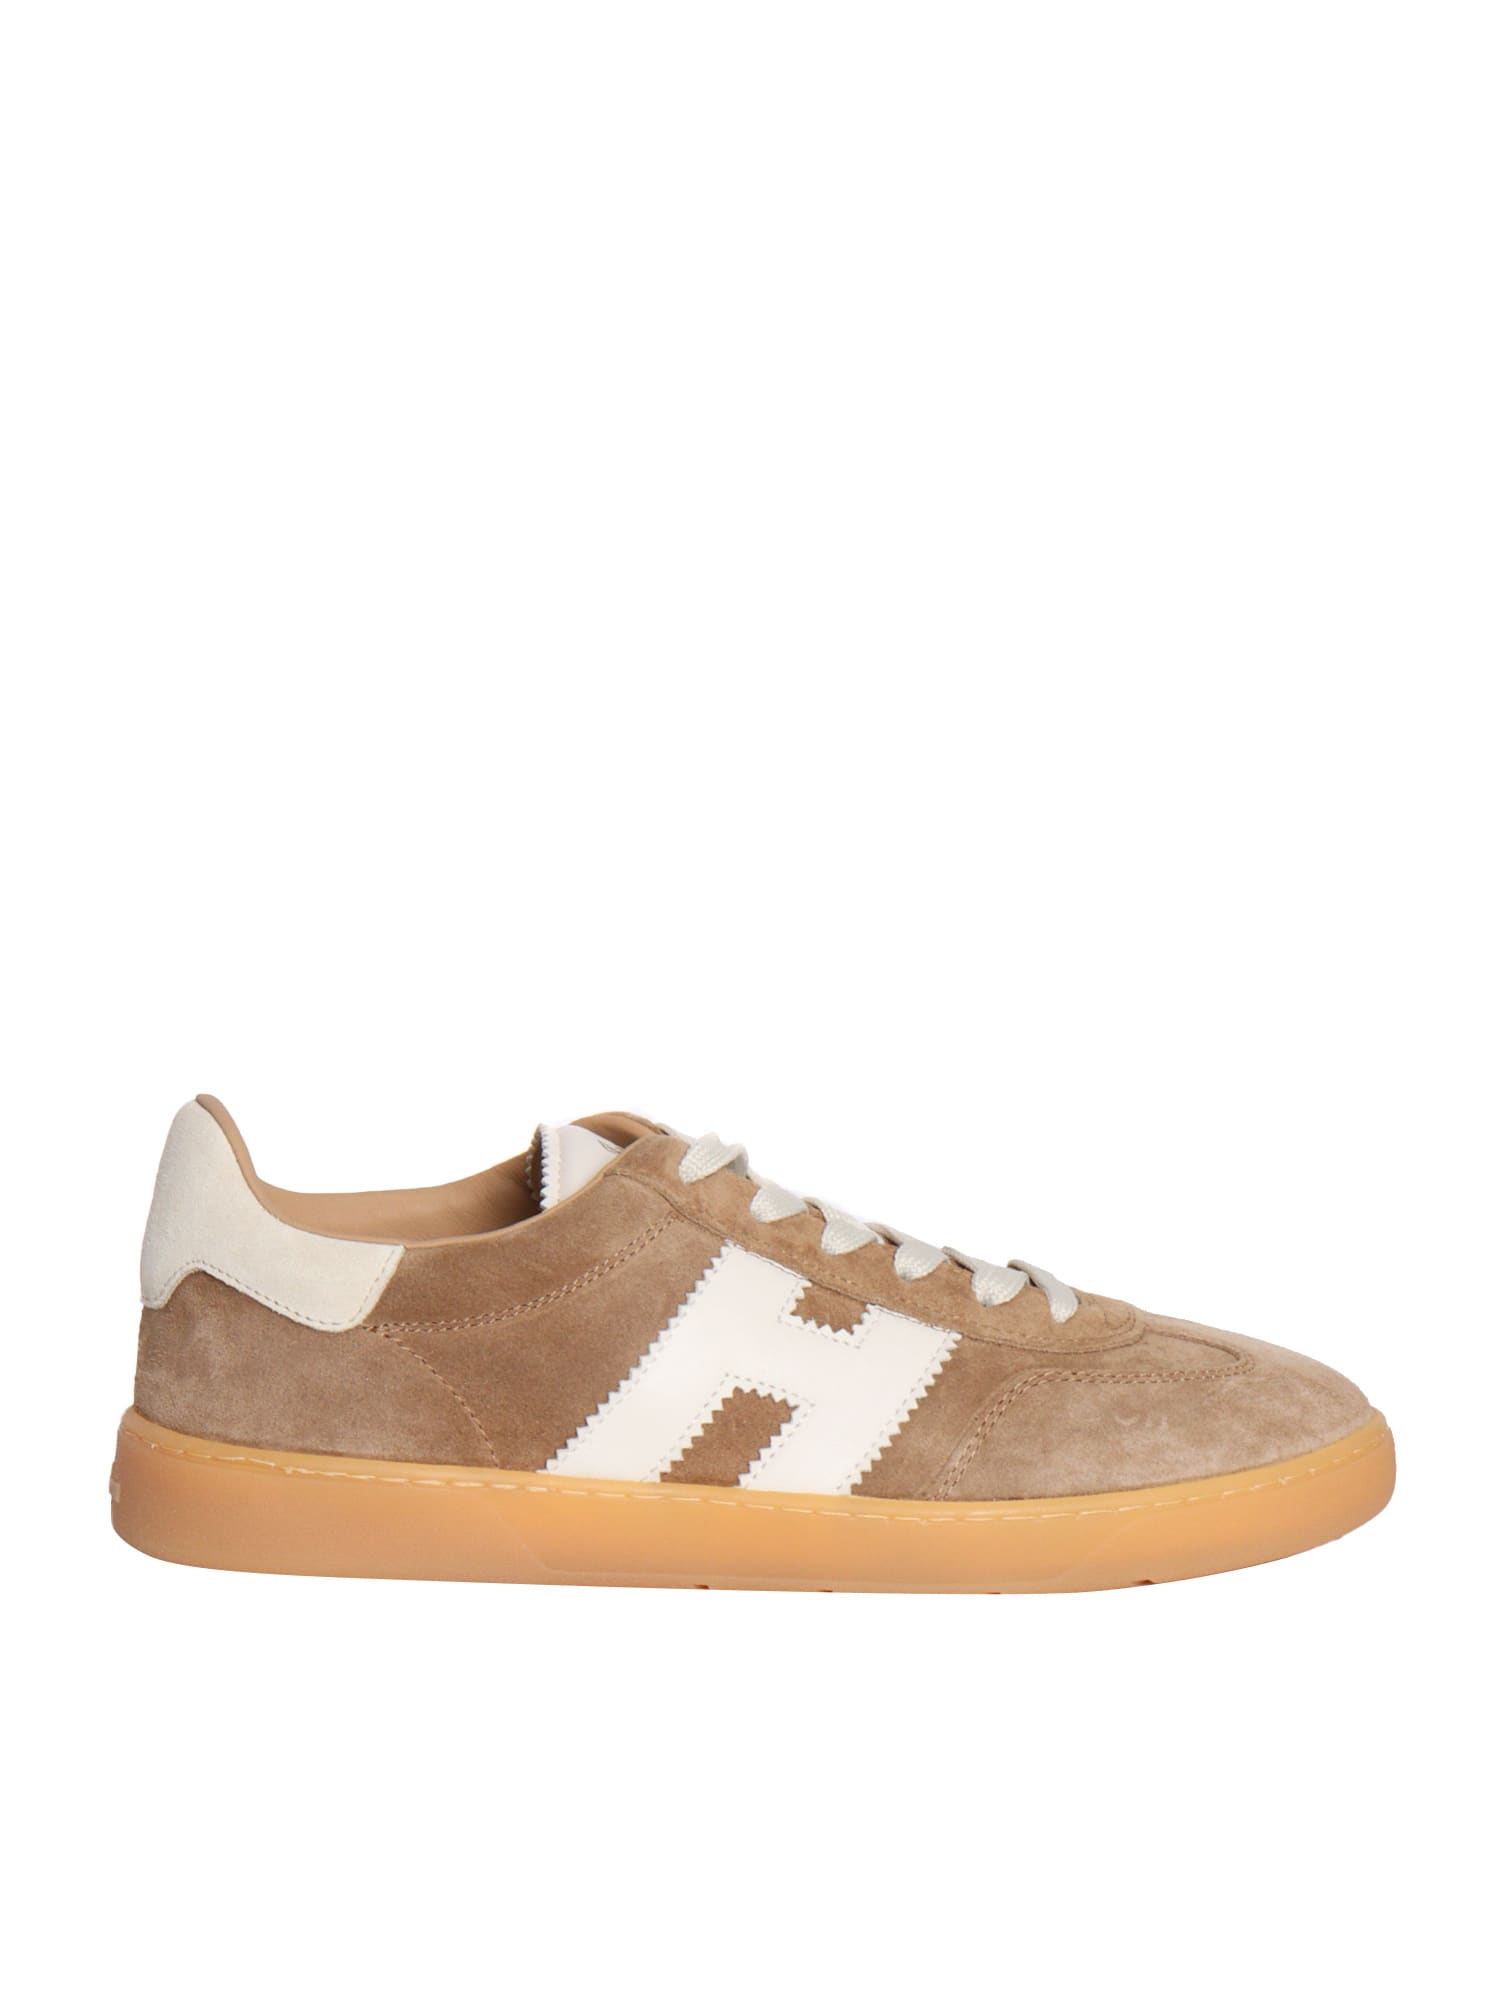 Hogan Cool Brown Trainers